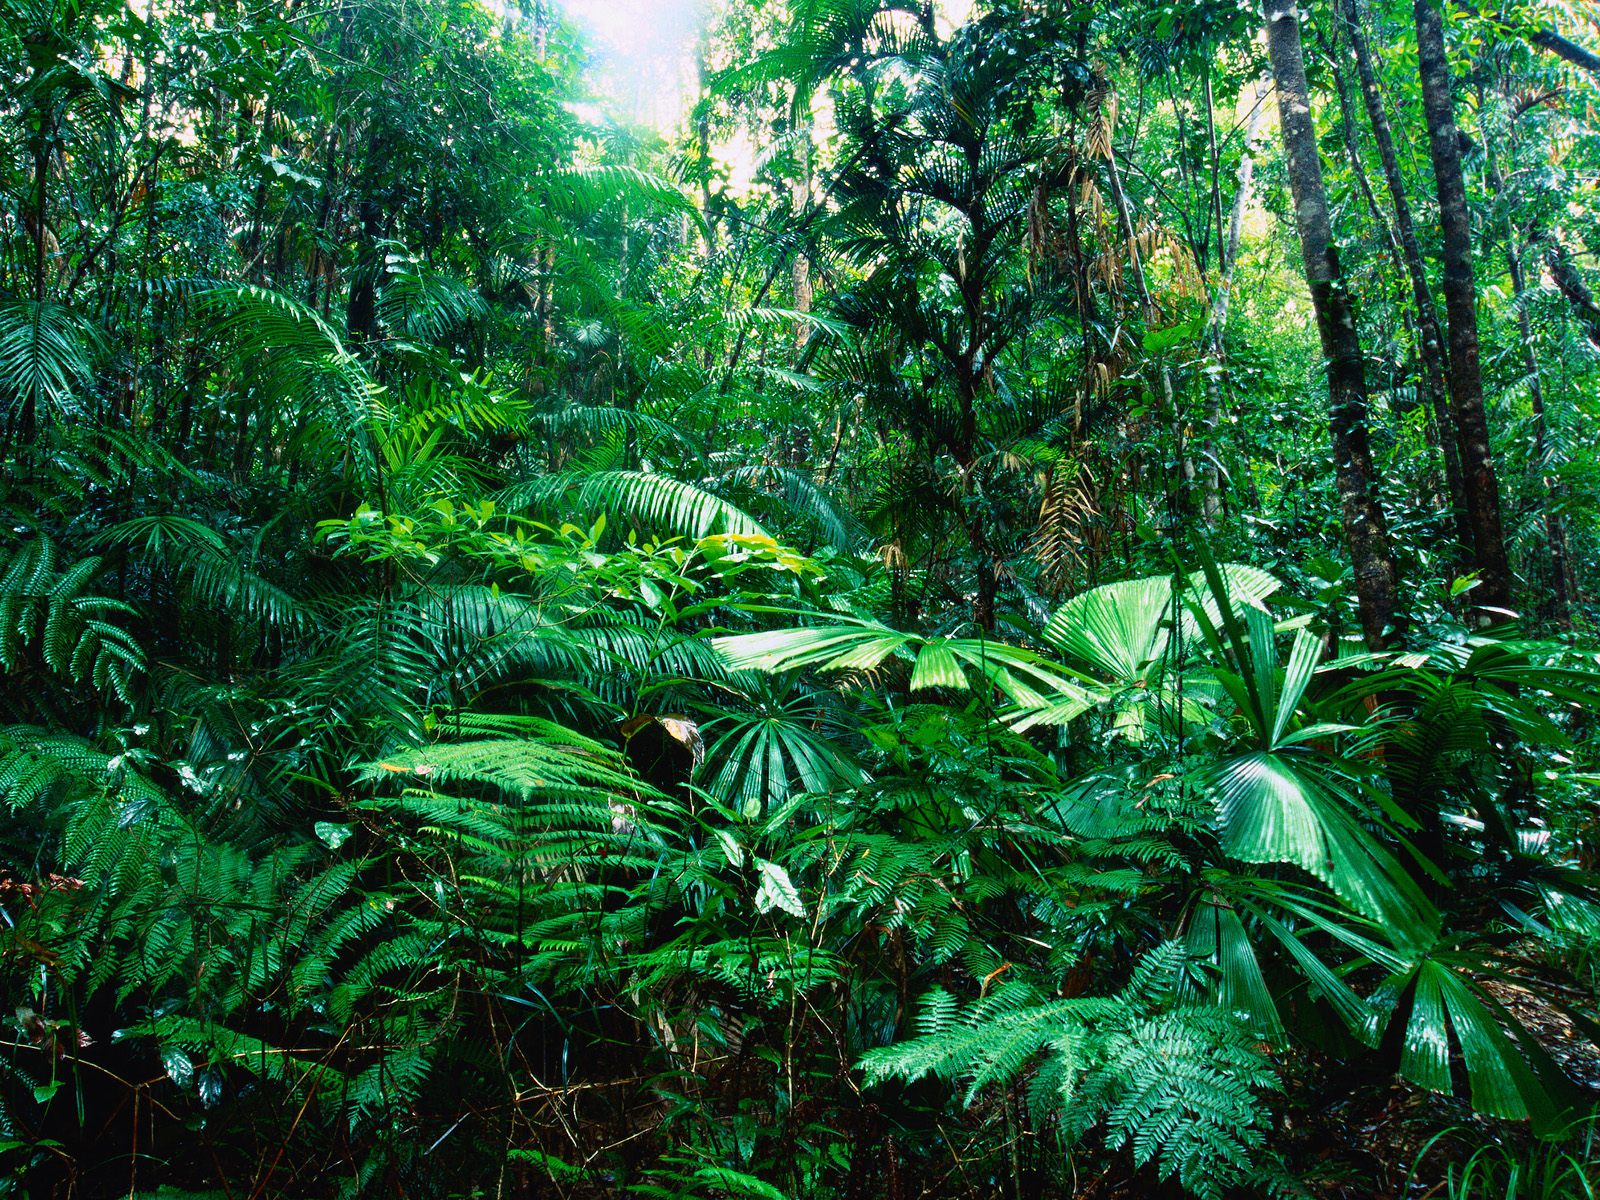 World Visits: Tropical Rainforests - Green Plants On The Earth